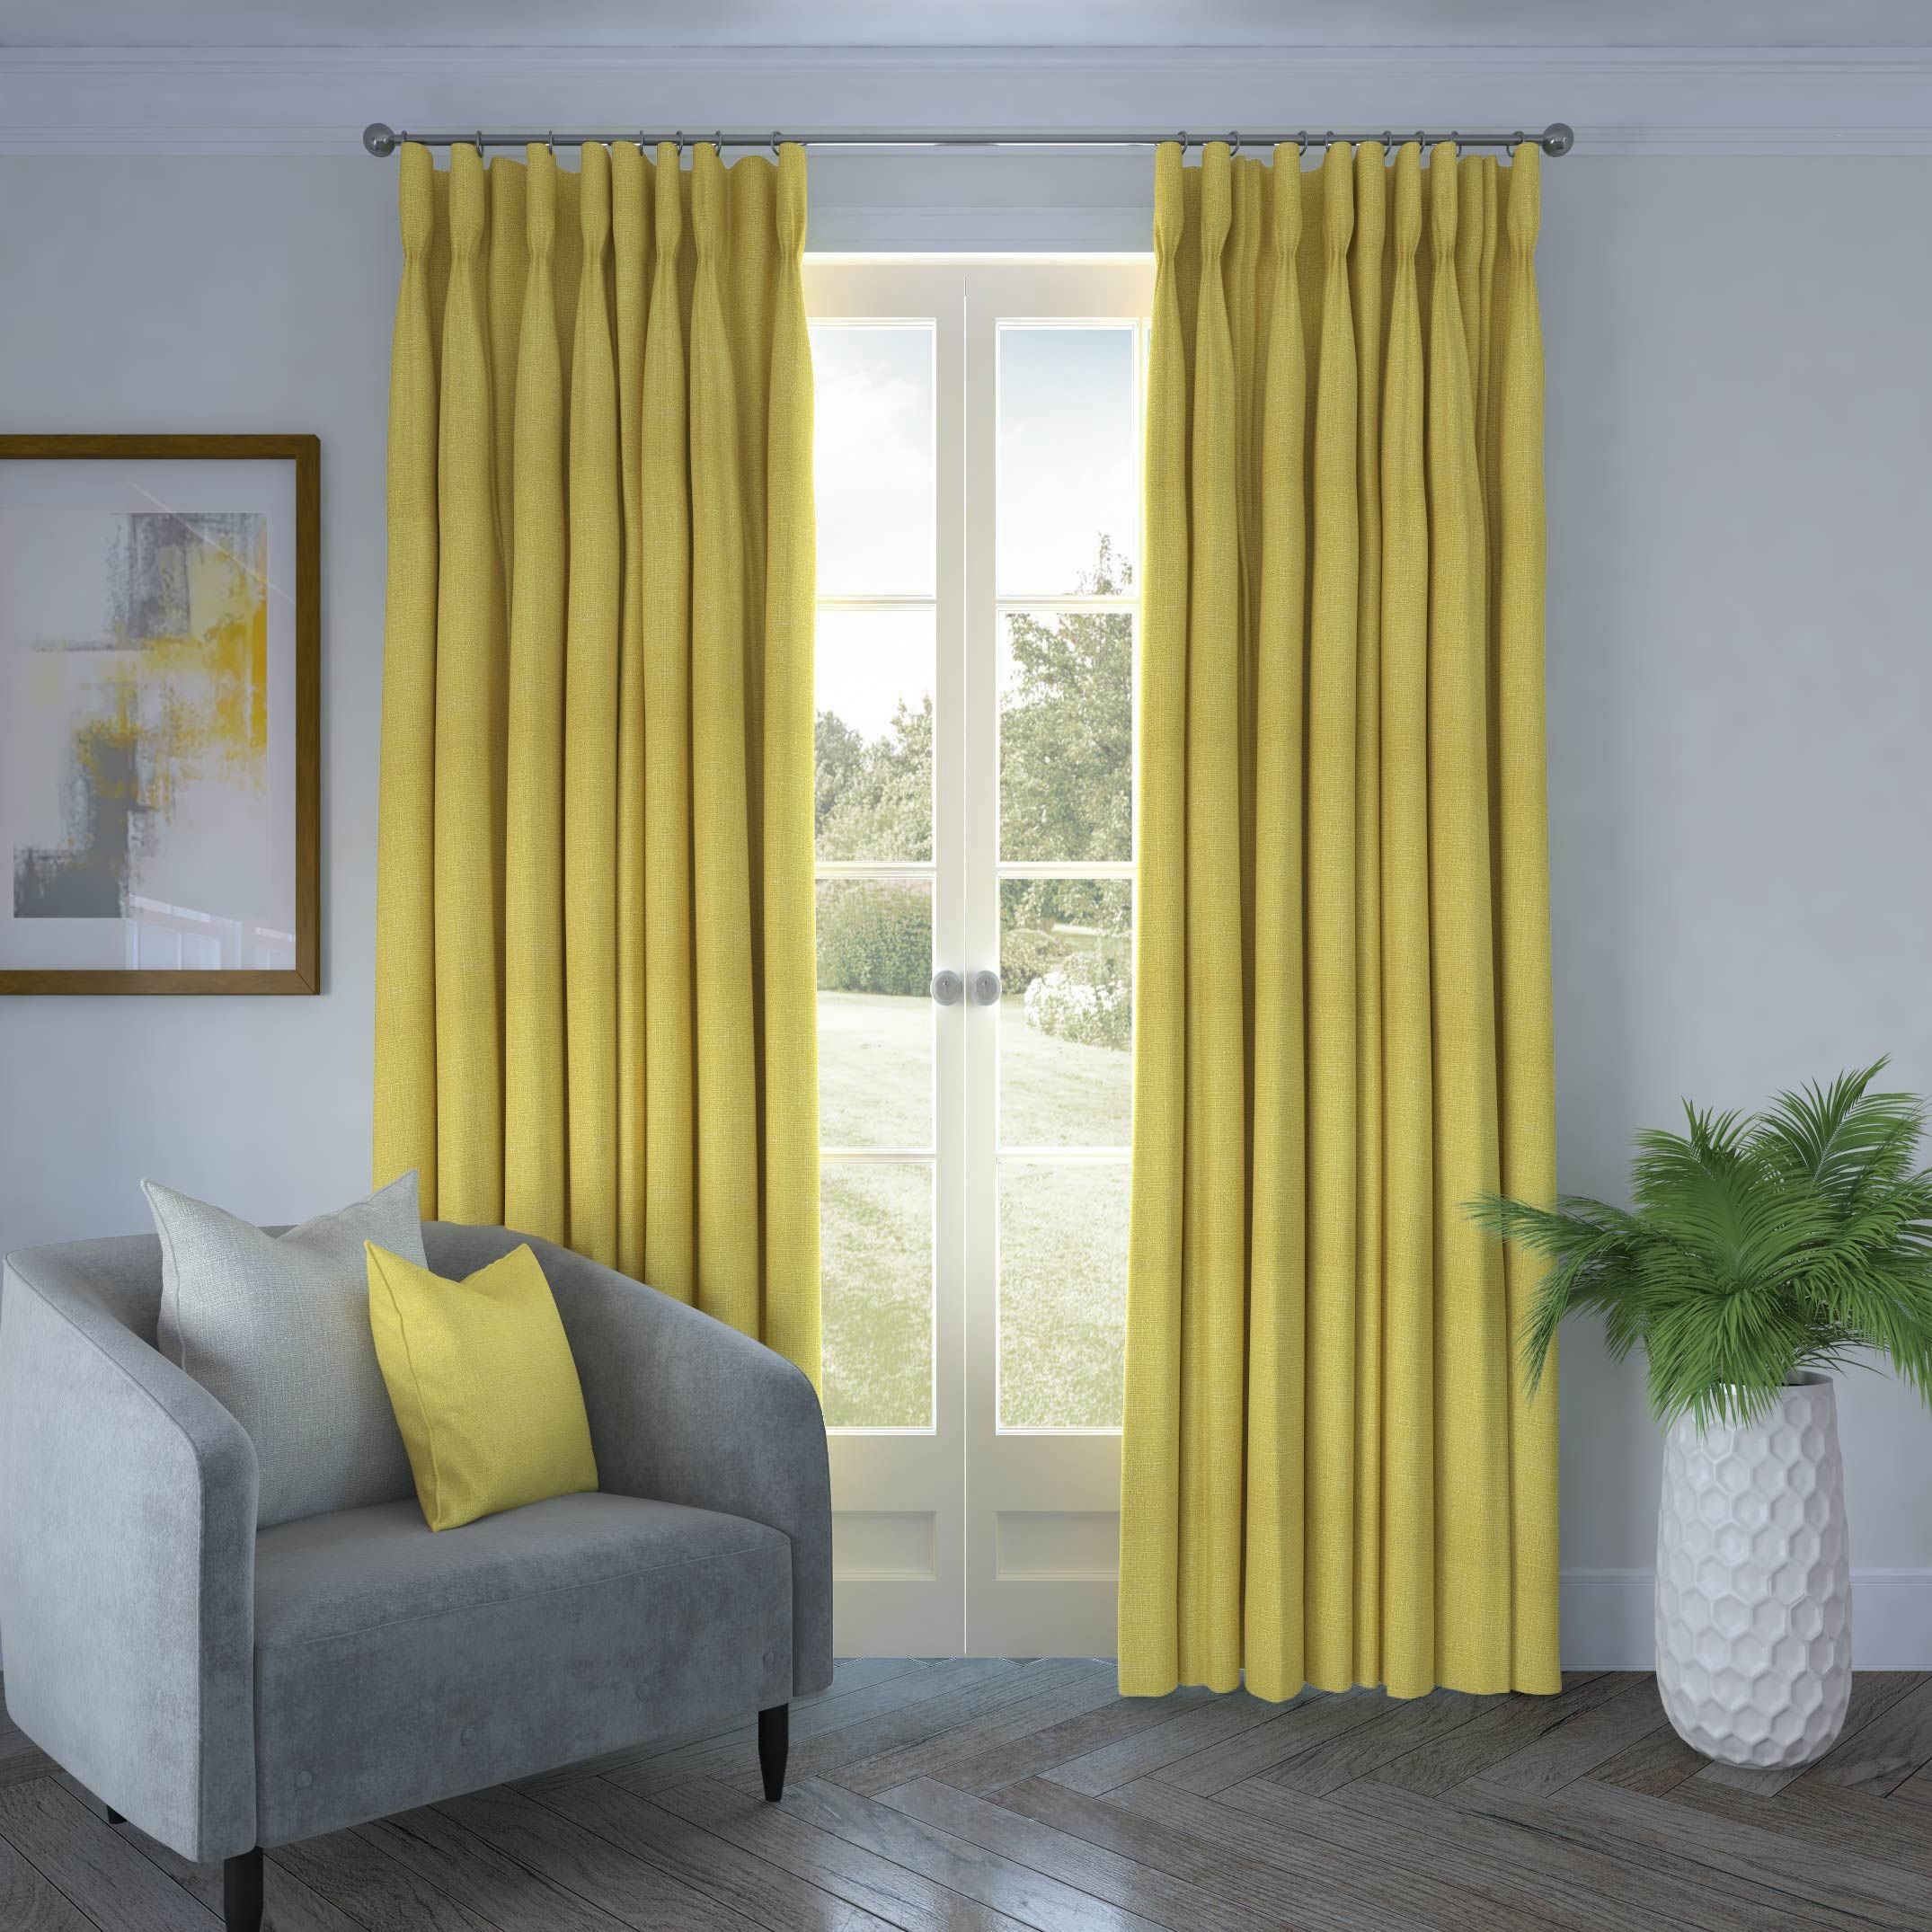 McAlister Textiles Harmony Linen Blend Ochre Textured Curtains Tailored Curtains 